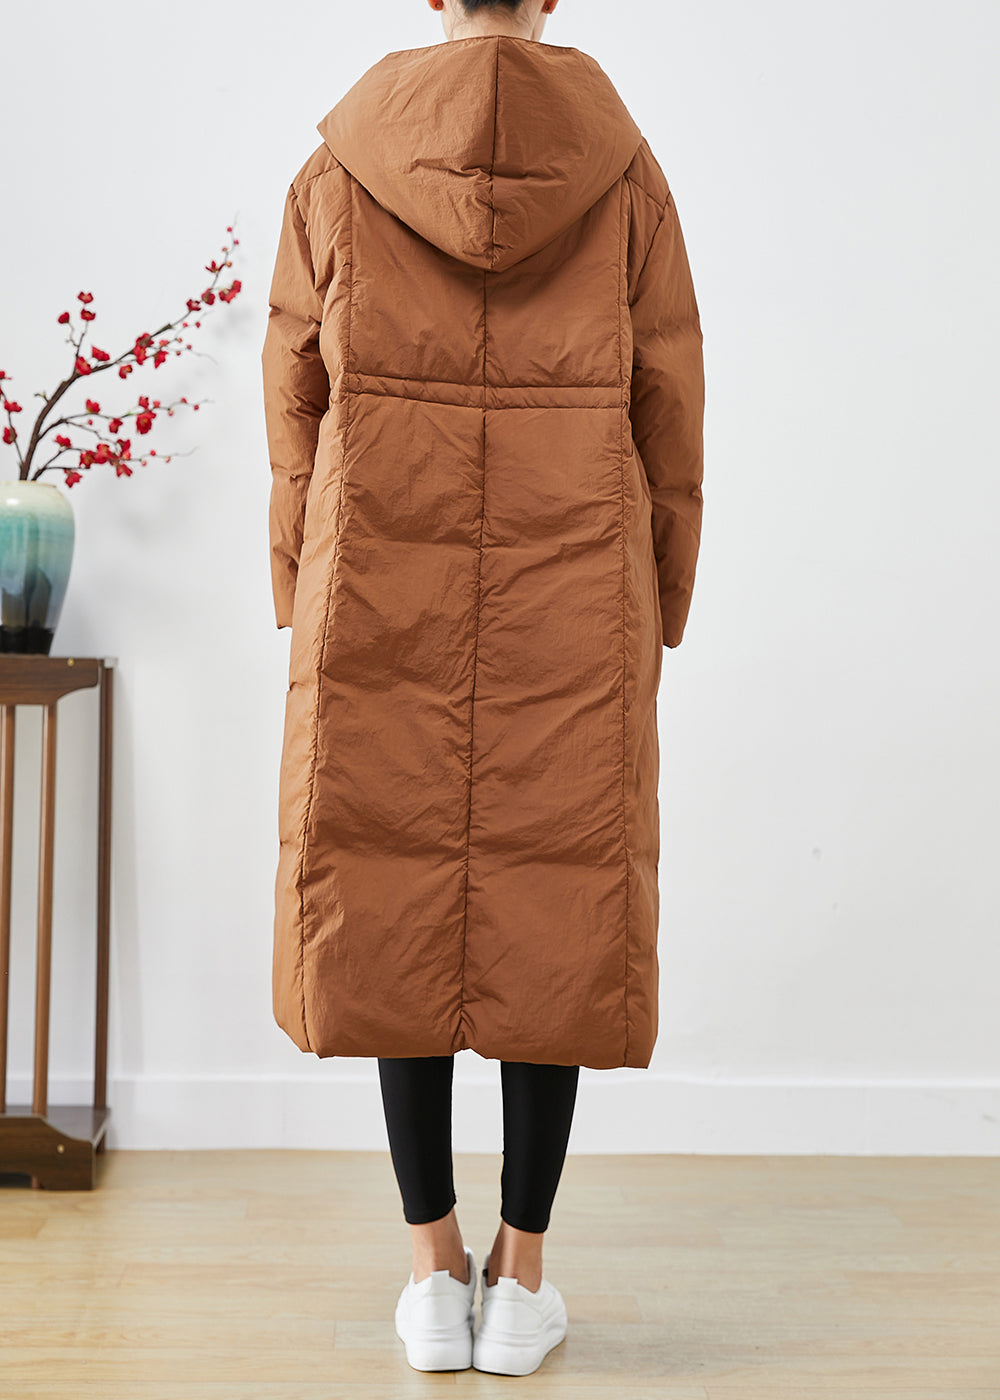 Coffee Patchwork Duck Down Puffers Jackets Hooded Oversized Winter